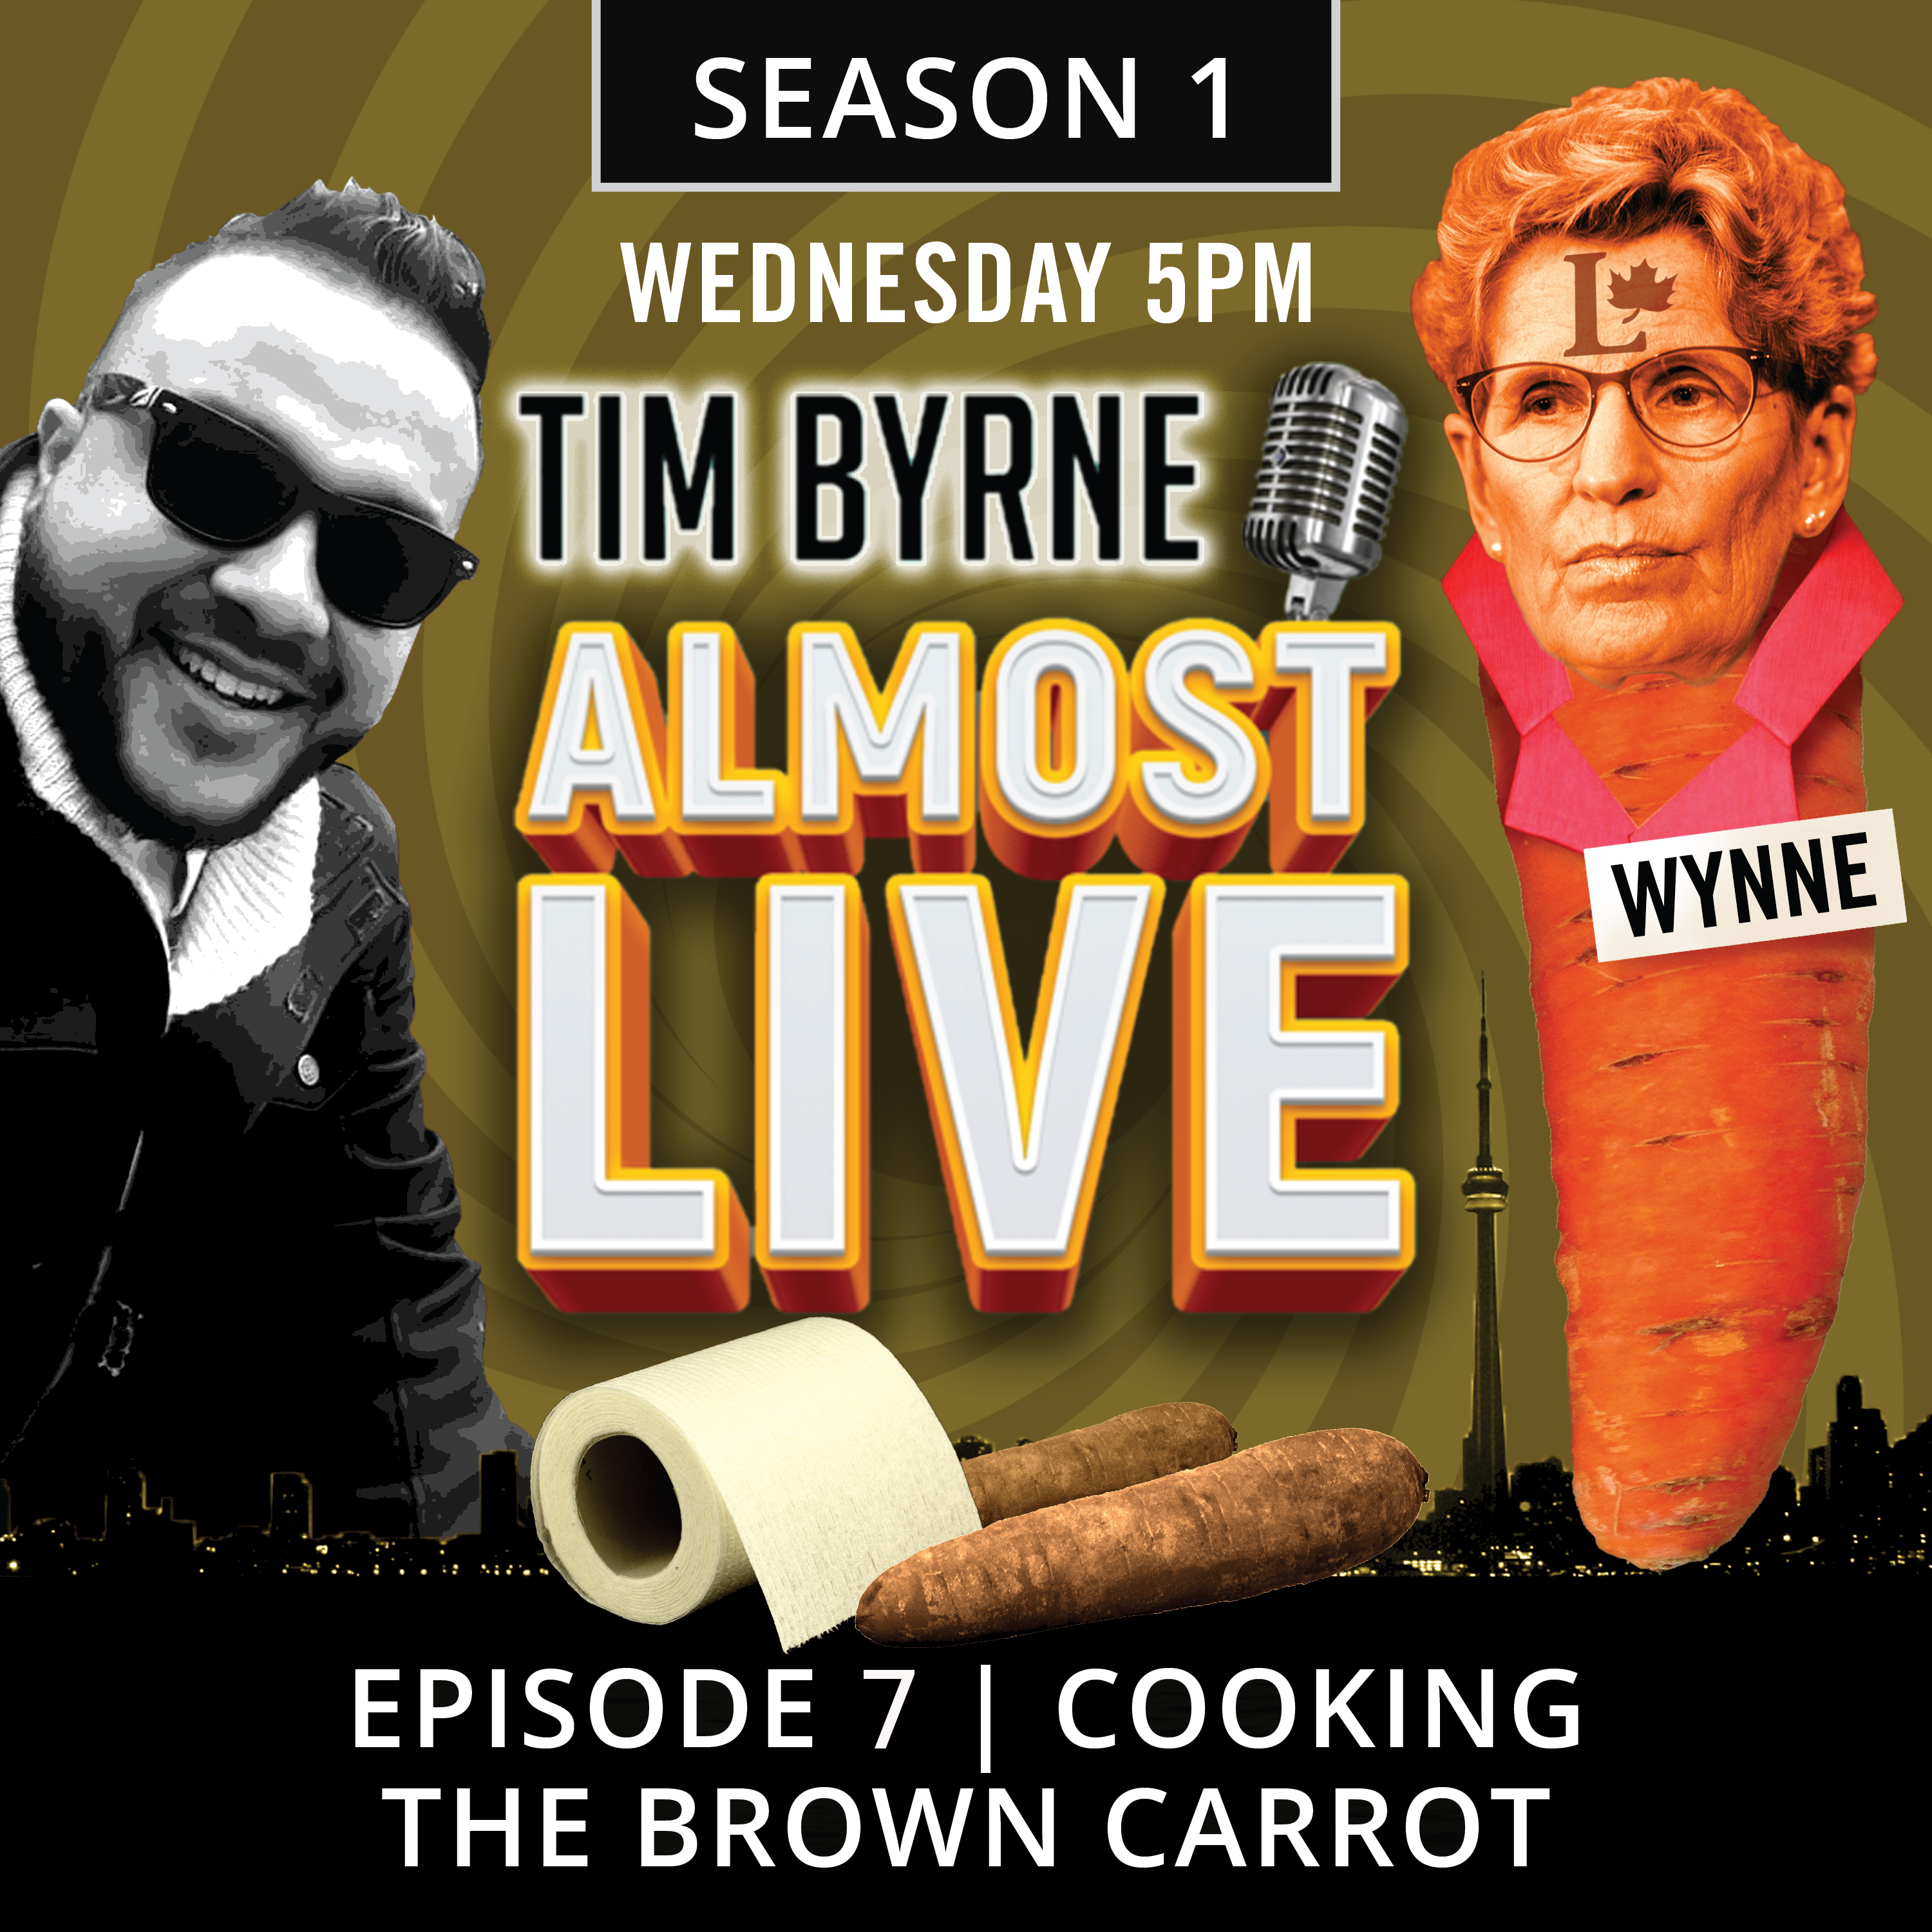 Episode 7 – Cooking the brown carrot